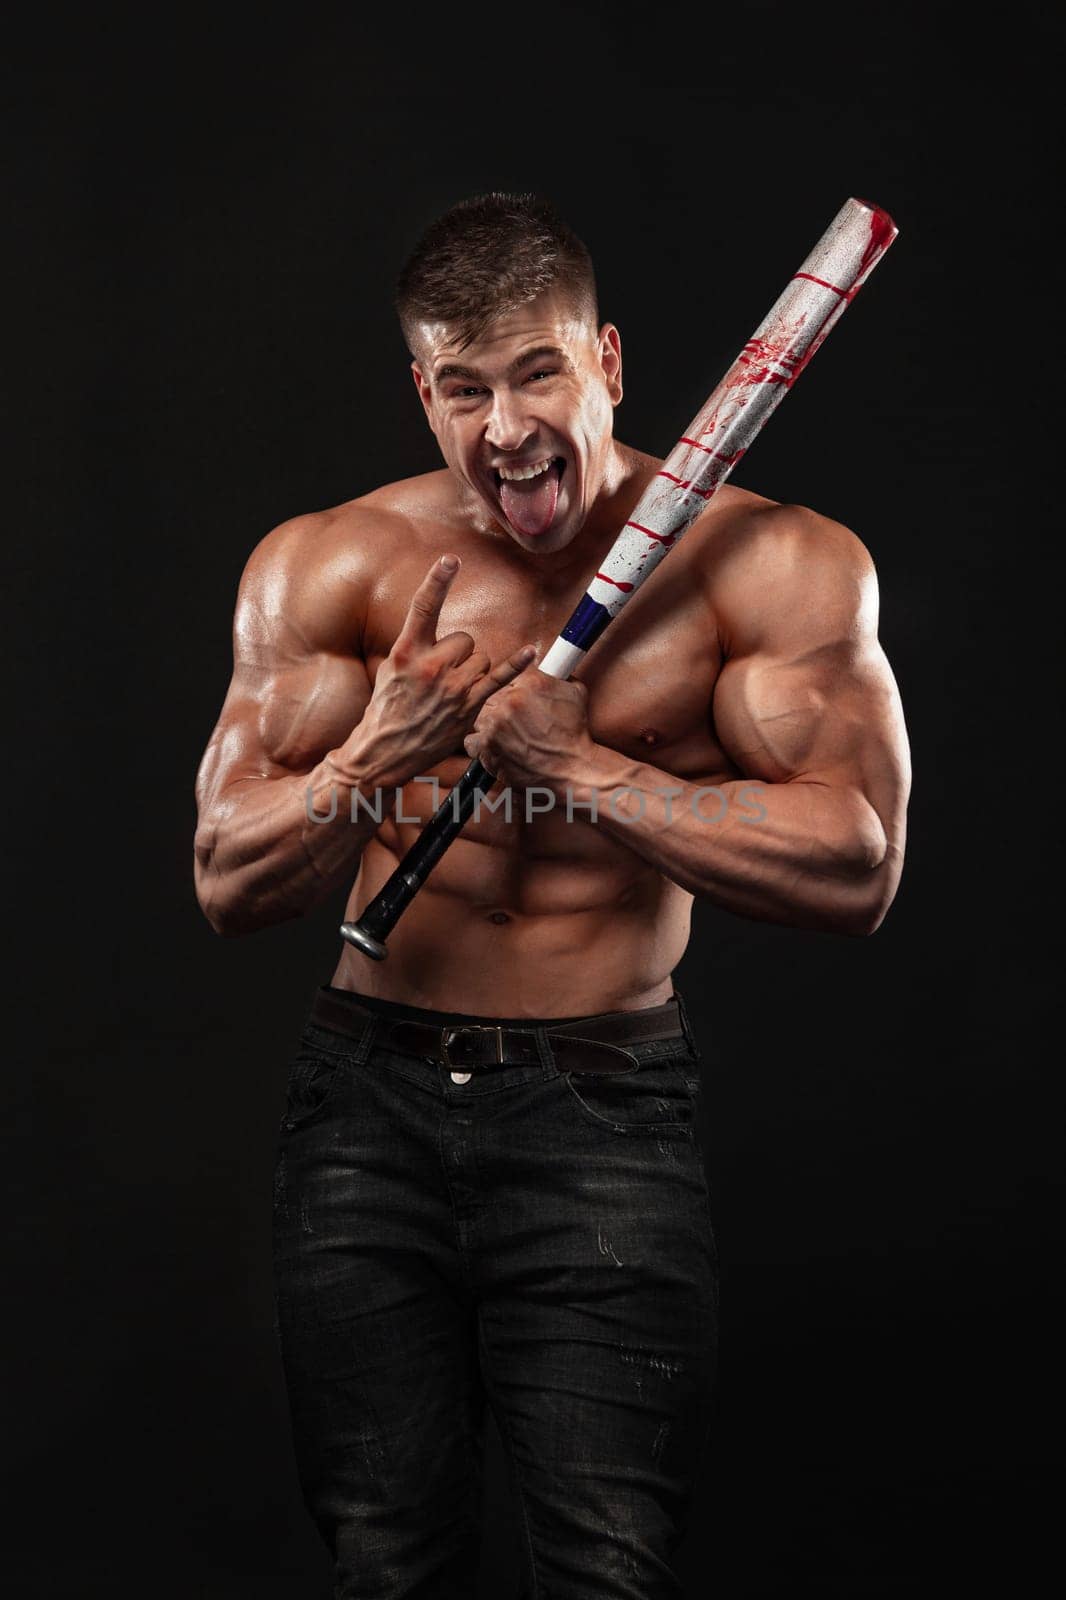 Brutal strong muscular bodybuilder athletic man pumping up muscles with baseball bat on black background. by MikeOrlov